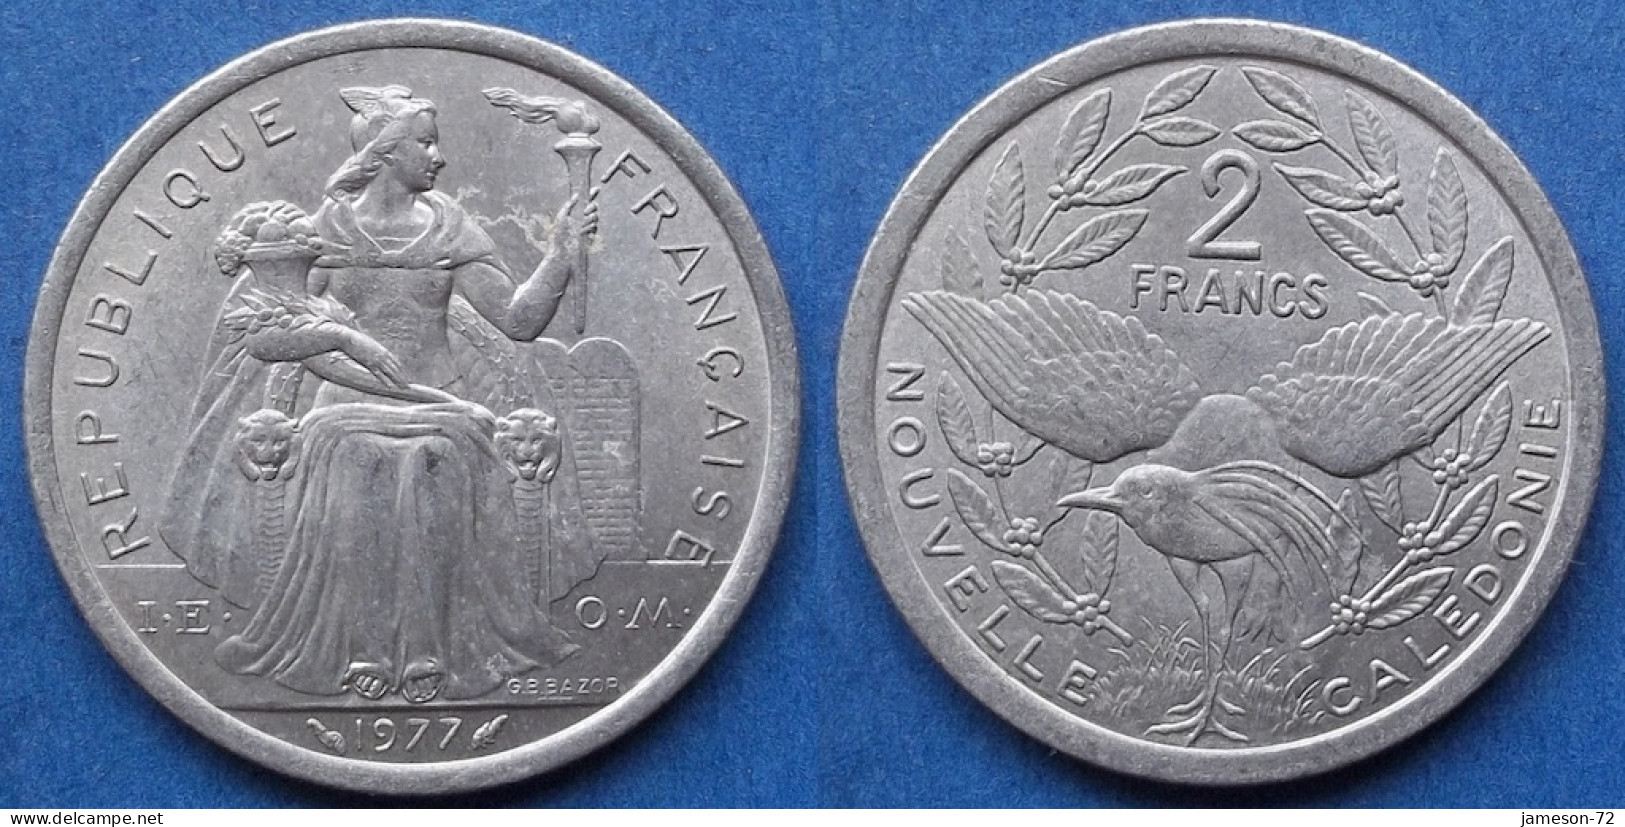 NEW CALEDONIA - 2 Francs 1977 KM# 14 French Overseas Territory - Edelweiss Coins - Nouvelle-Calédonie